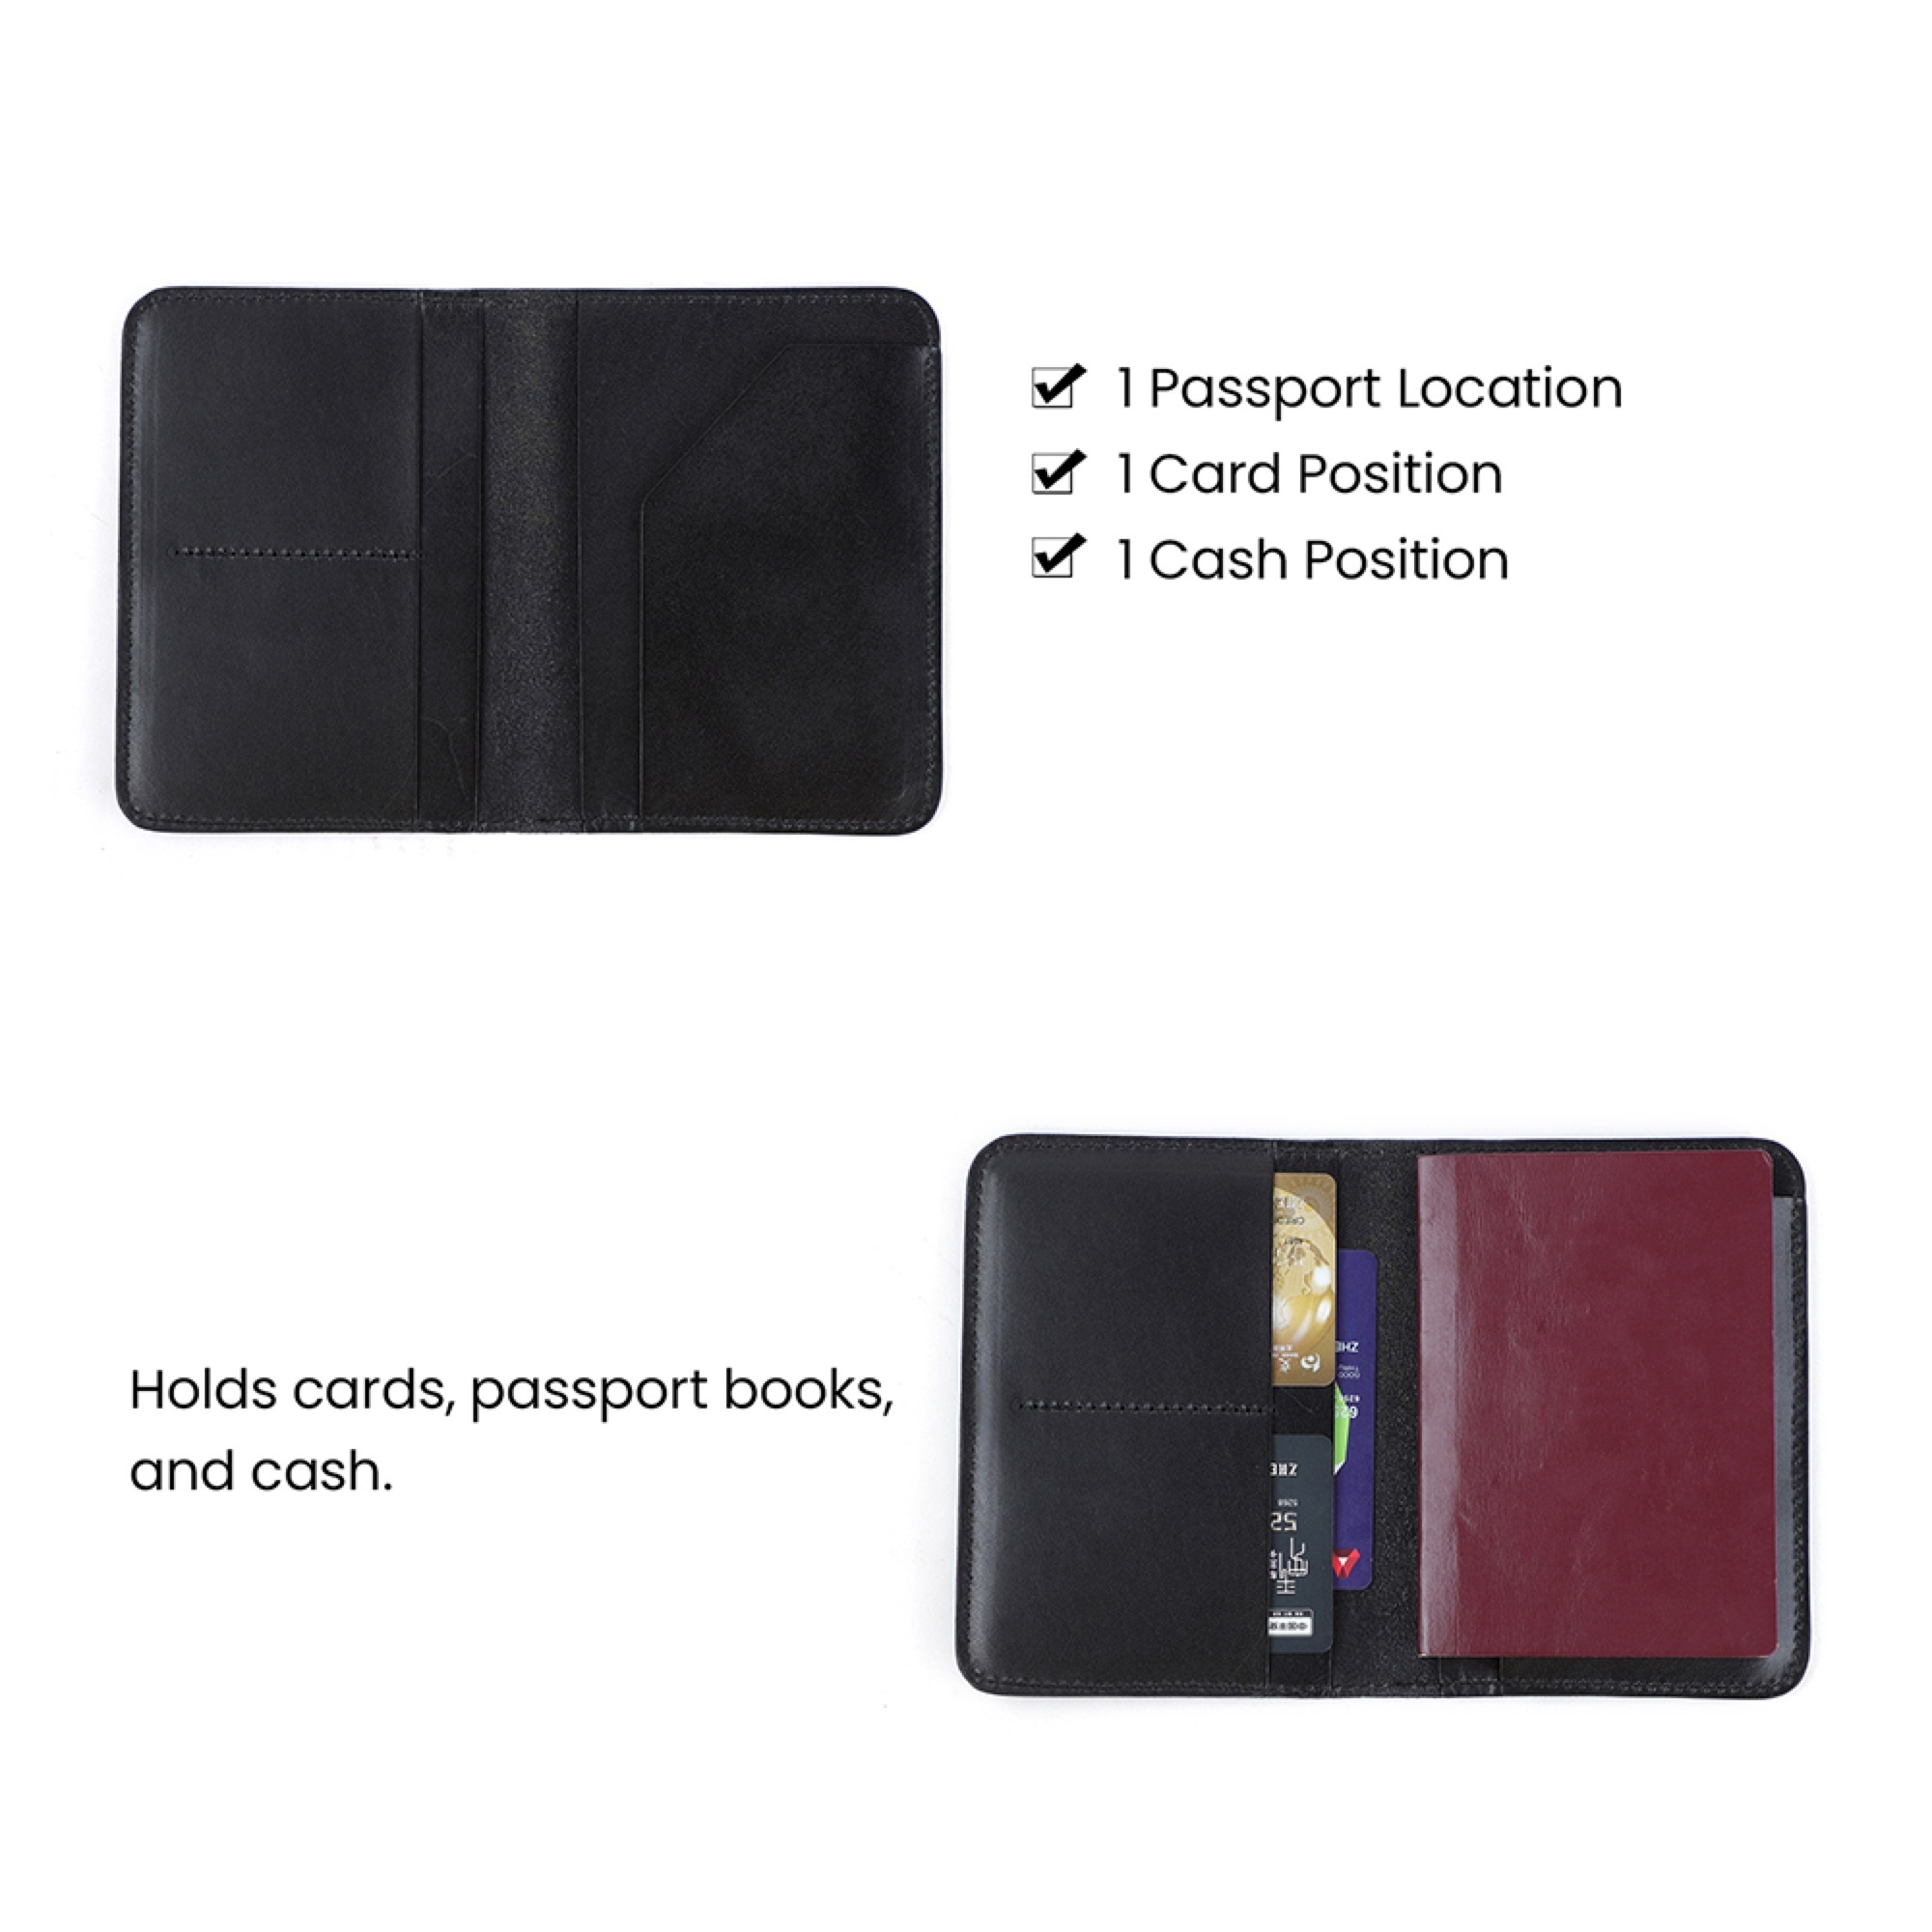 Passport Holder, Leather, Passport Cover, Passport Wallet for Cards, Ticket and Cash - Black-4